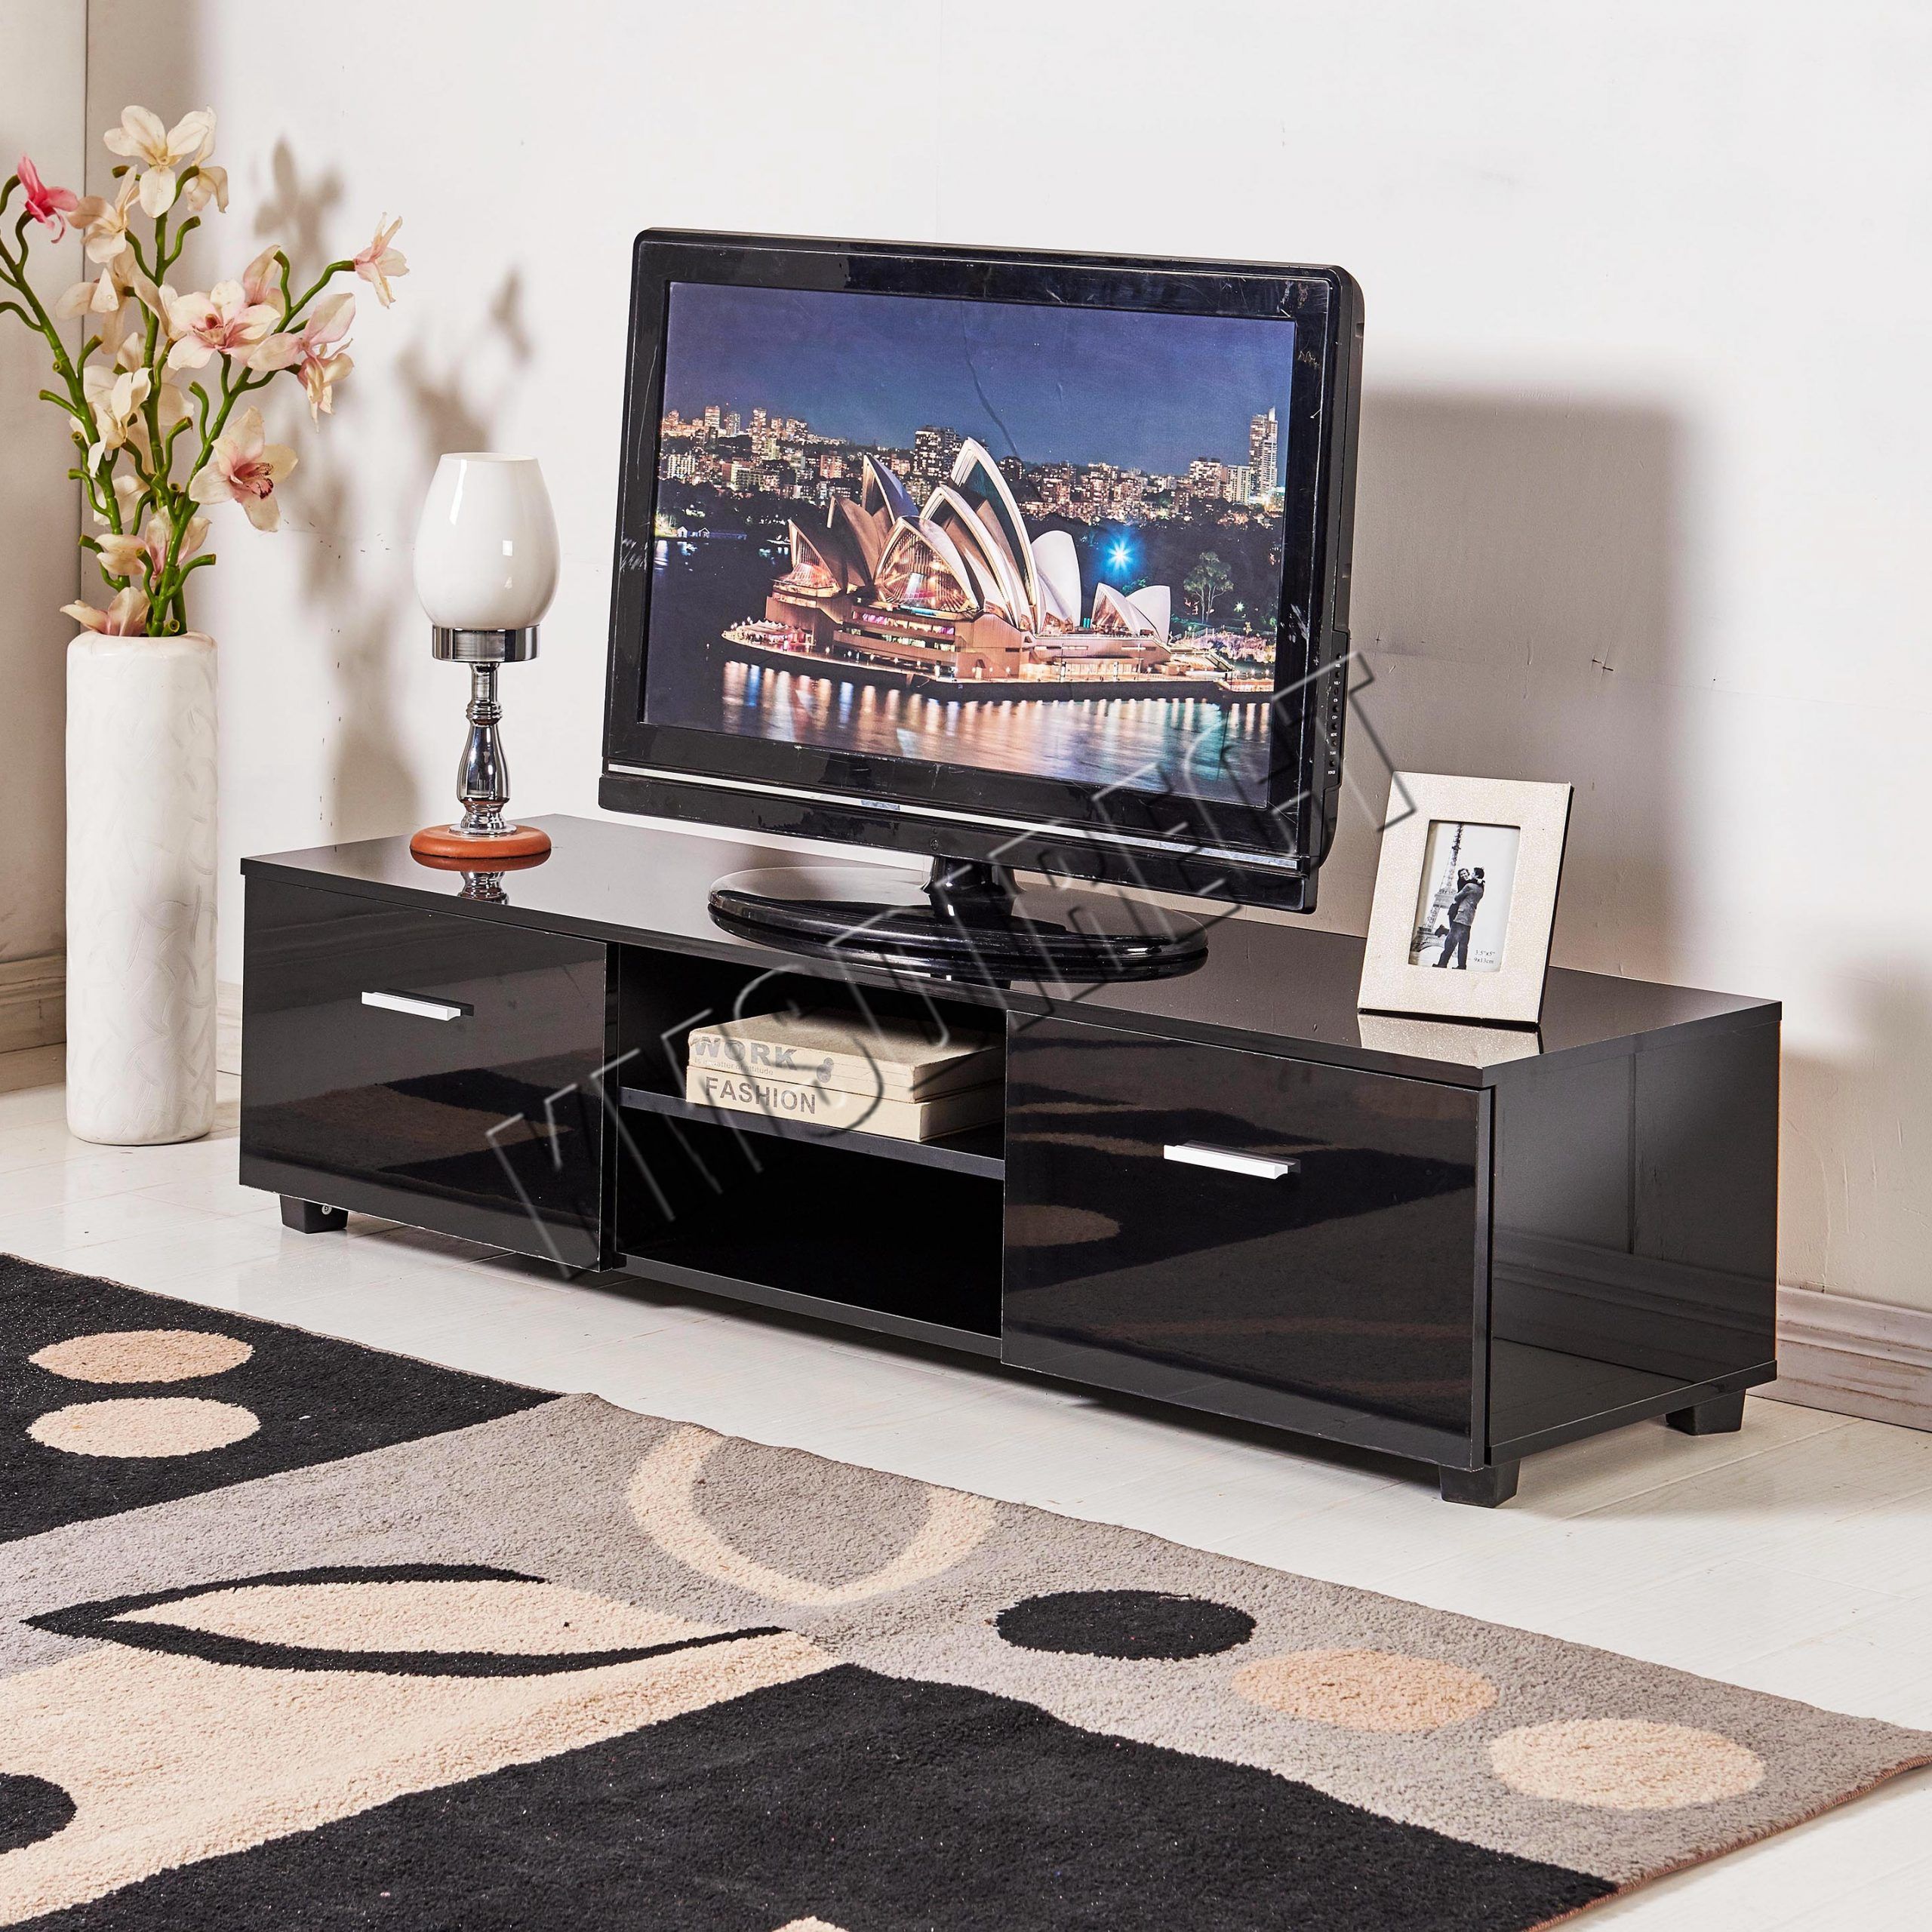 Foxhunter High Gloss Mdf Tv Cabinet Unit Stand Black Home Intended For Black Gloss Tv Stand (View 2 of 15)